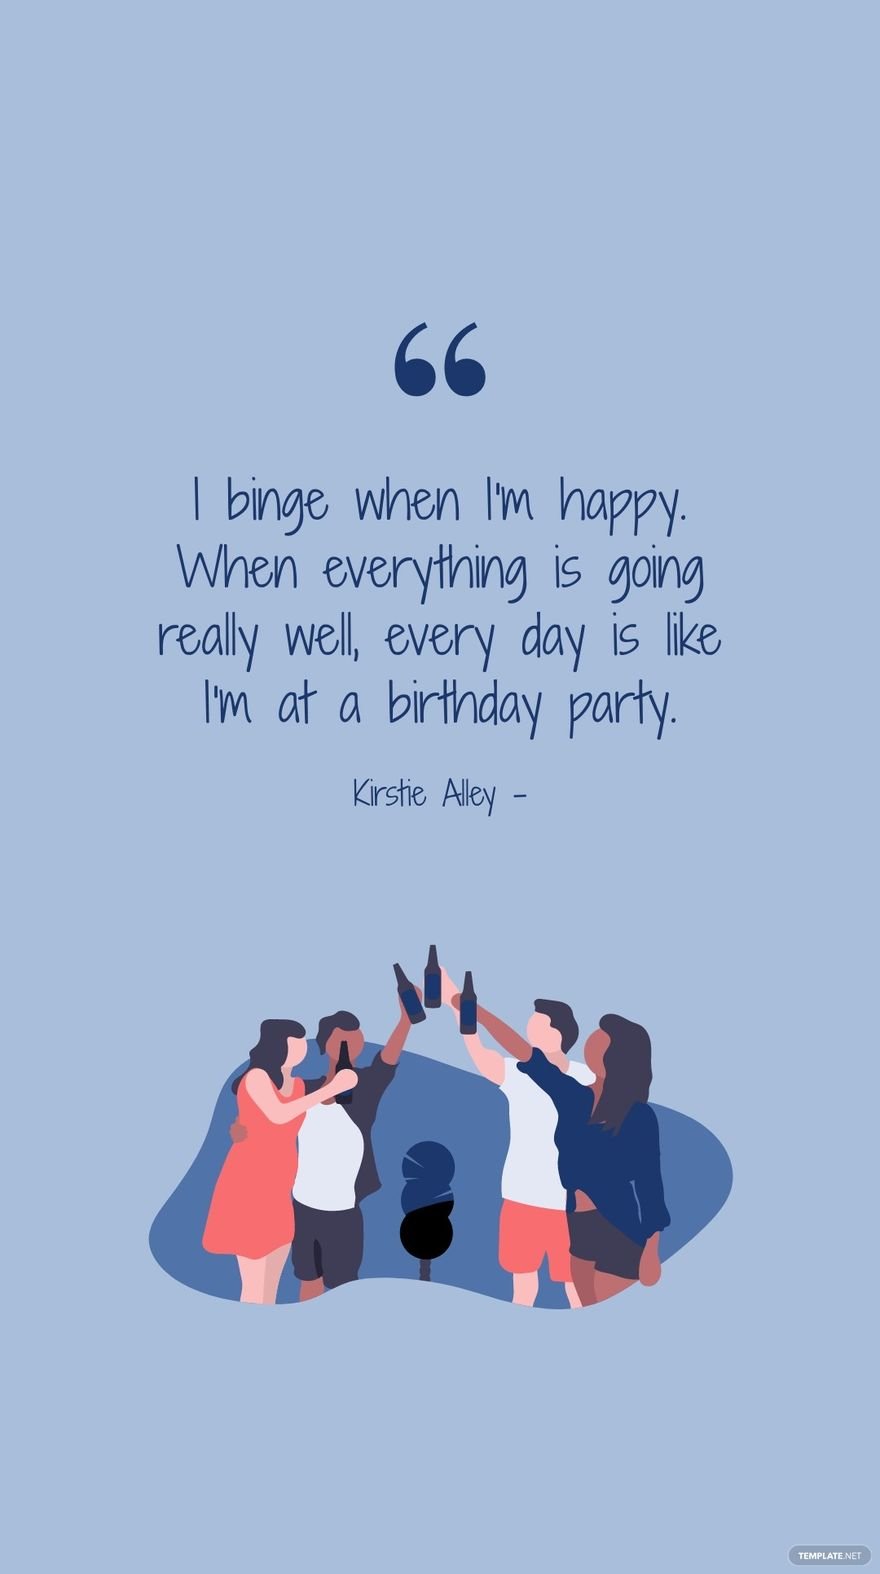 Free Kirstie Alley - I binge when I'm happy. When everything is going really well, every day is like I'm at a birthday party. in JPG